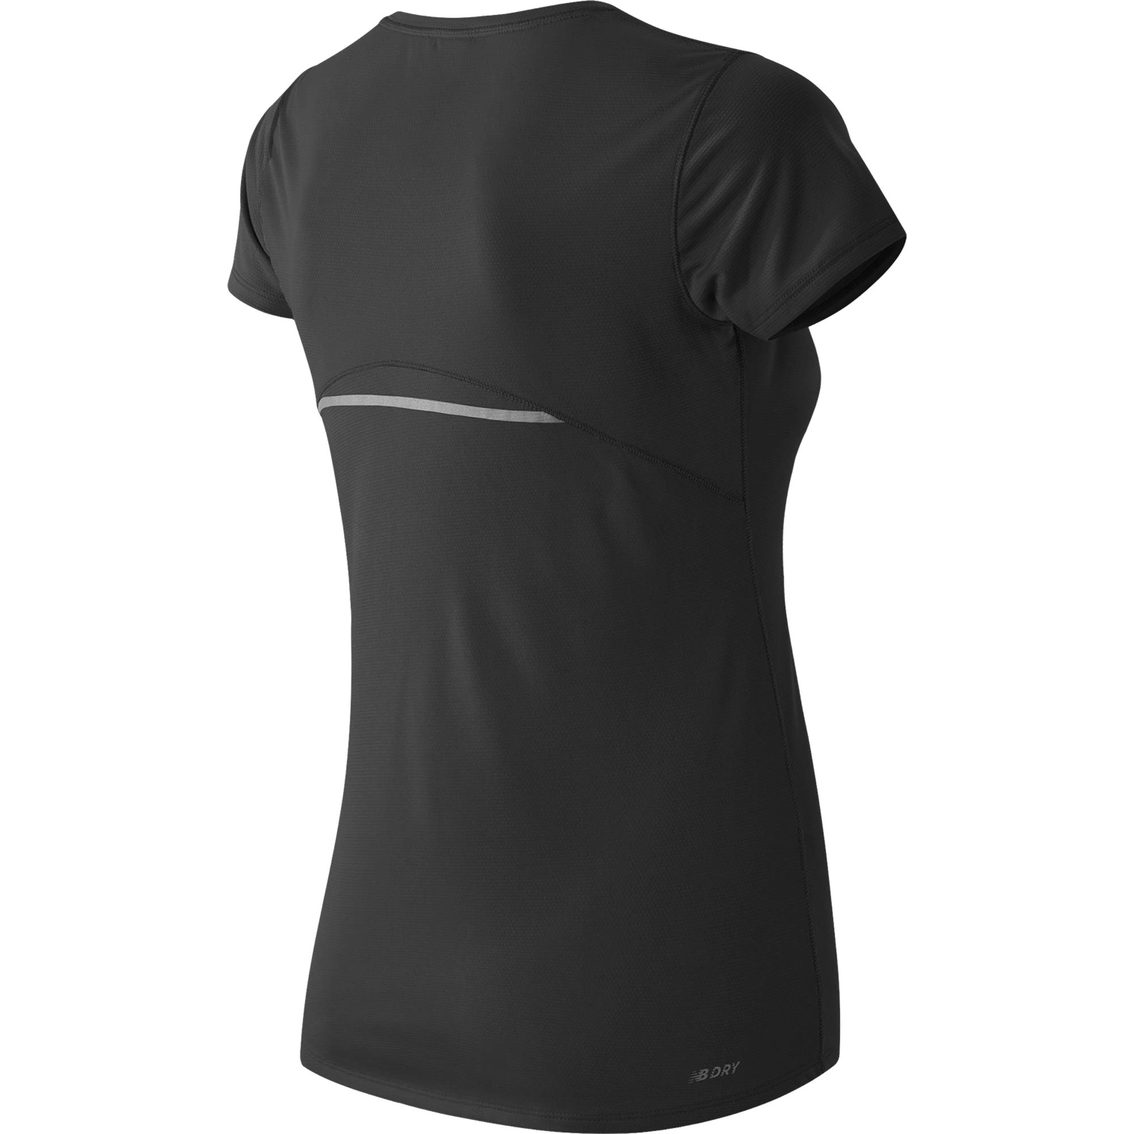 New Balance Accelerate Top - Image 2 of 2